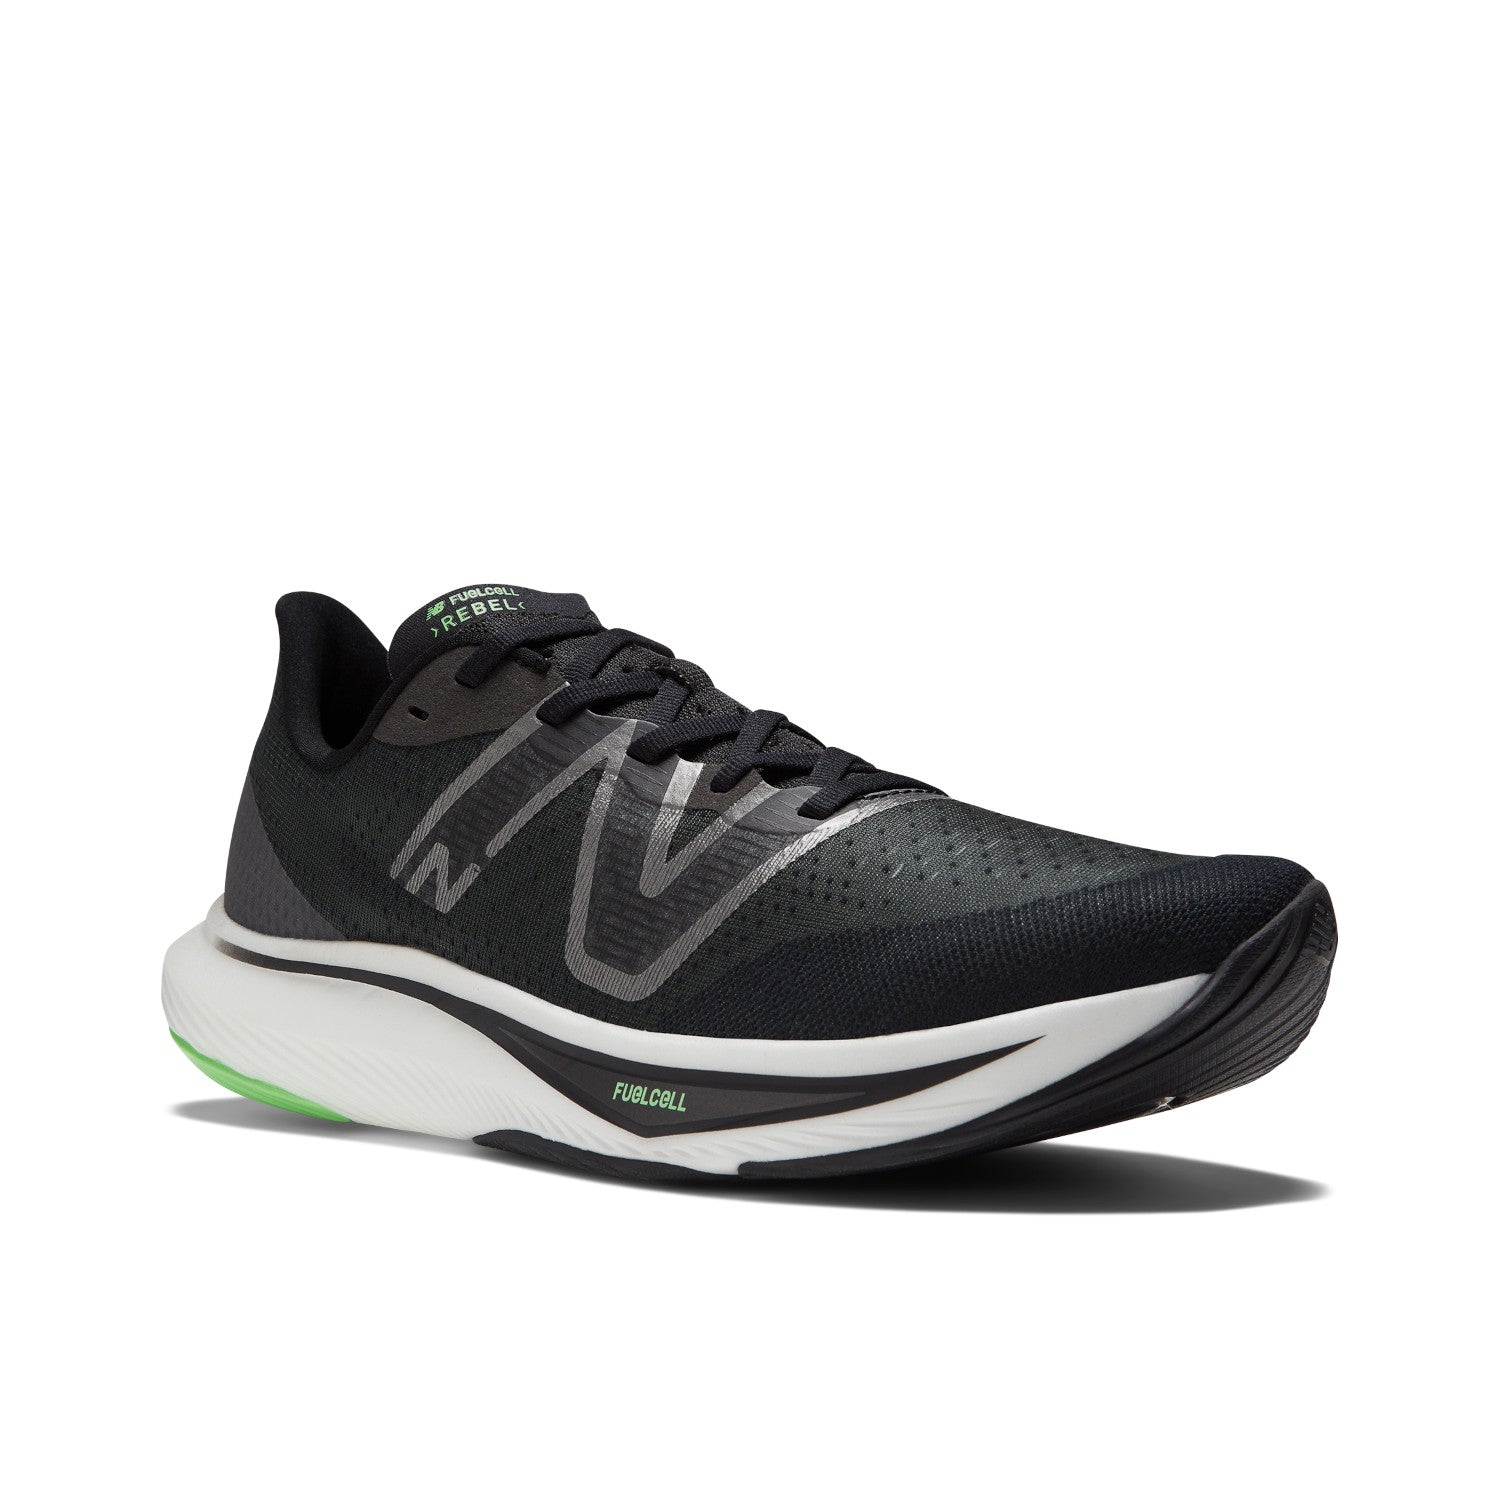 Men's New Balance FuelCell Rebel v3 Color: Black with Infinity Blue and Vibrant Spring